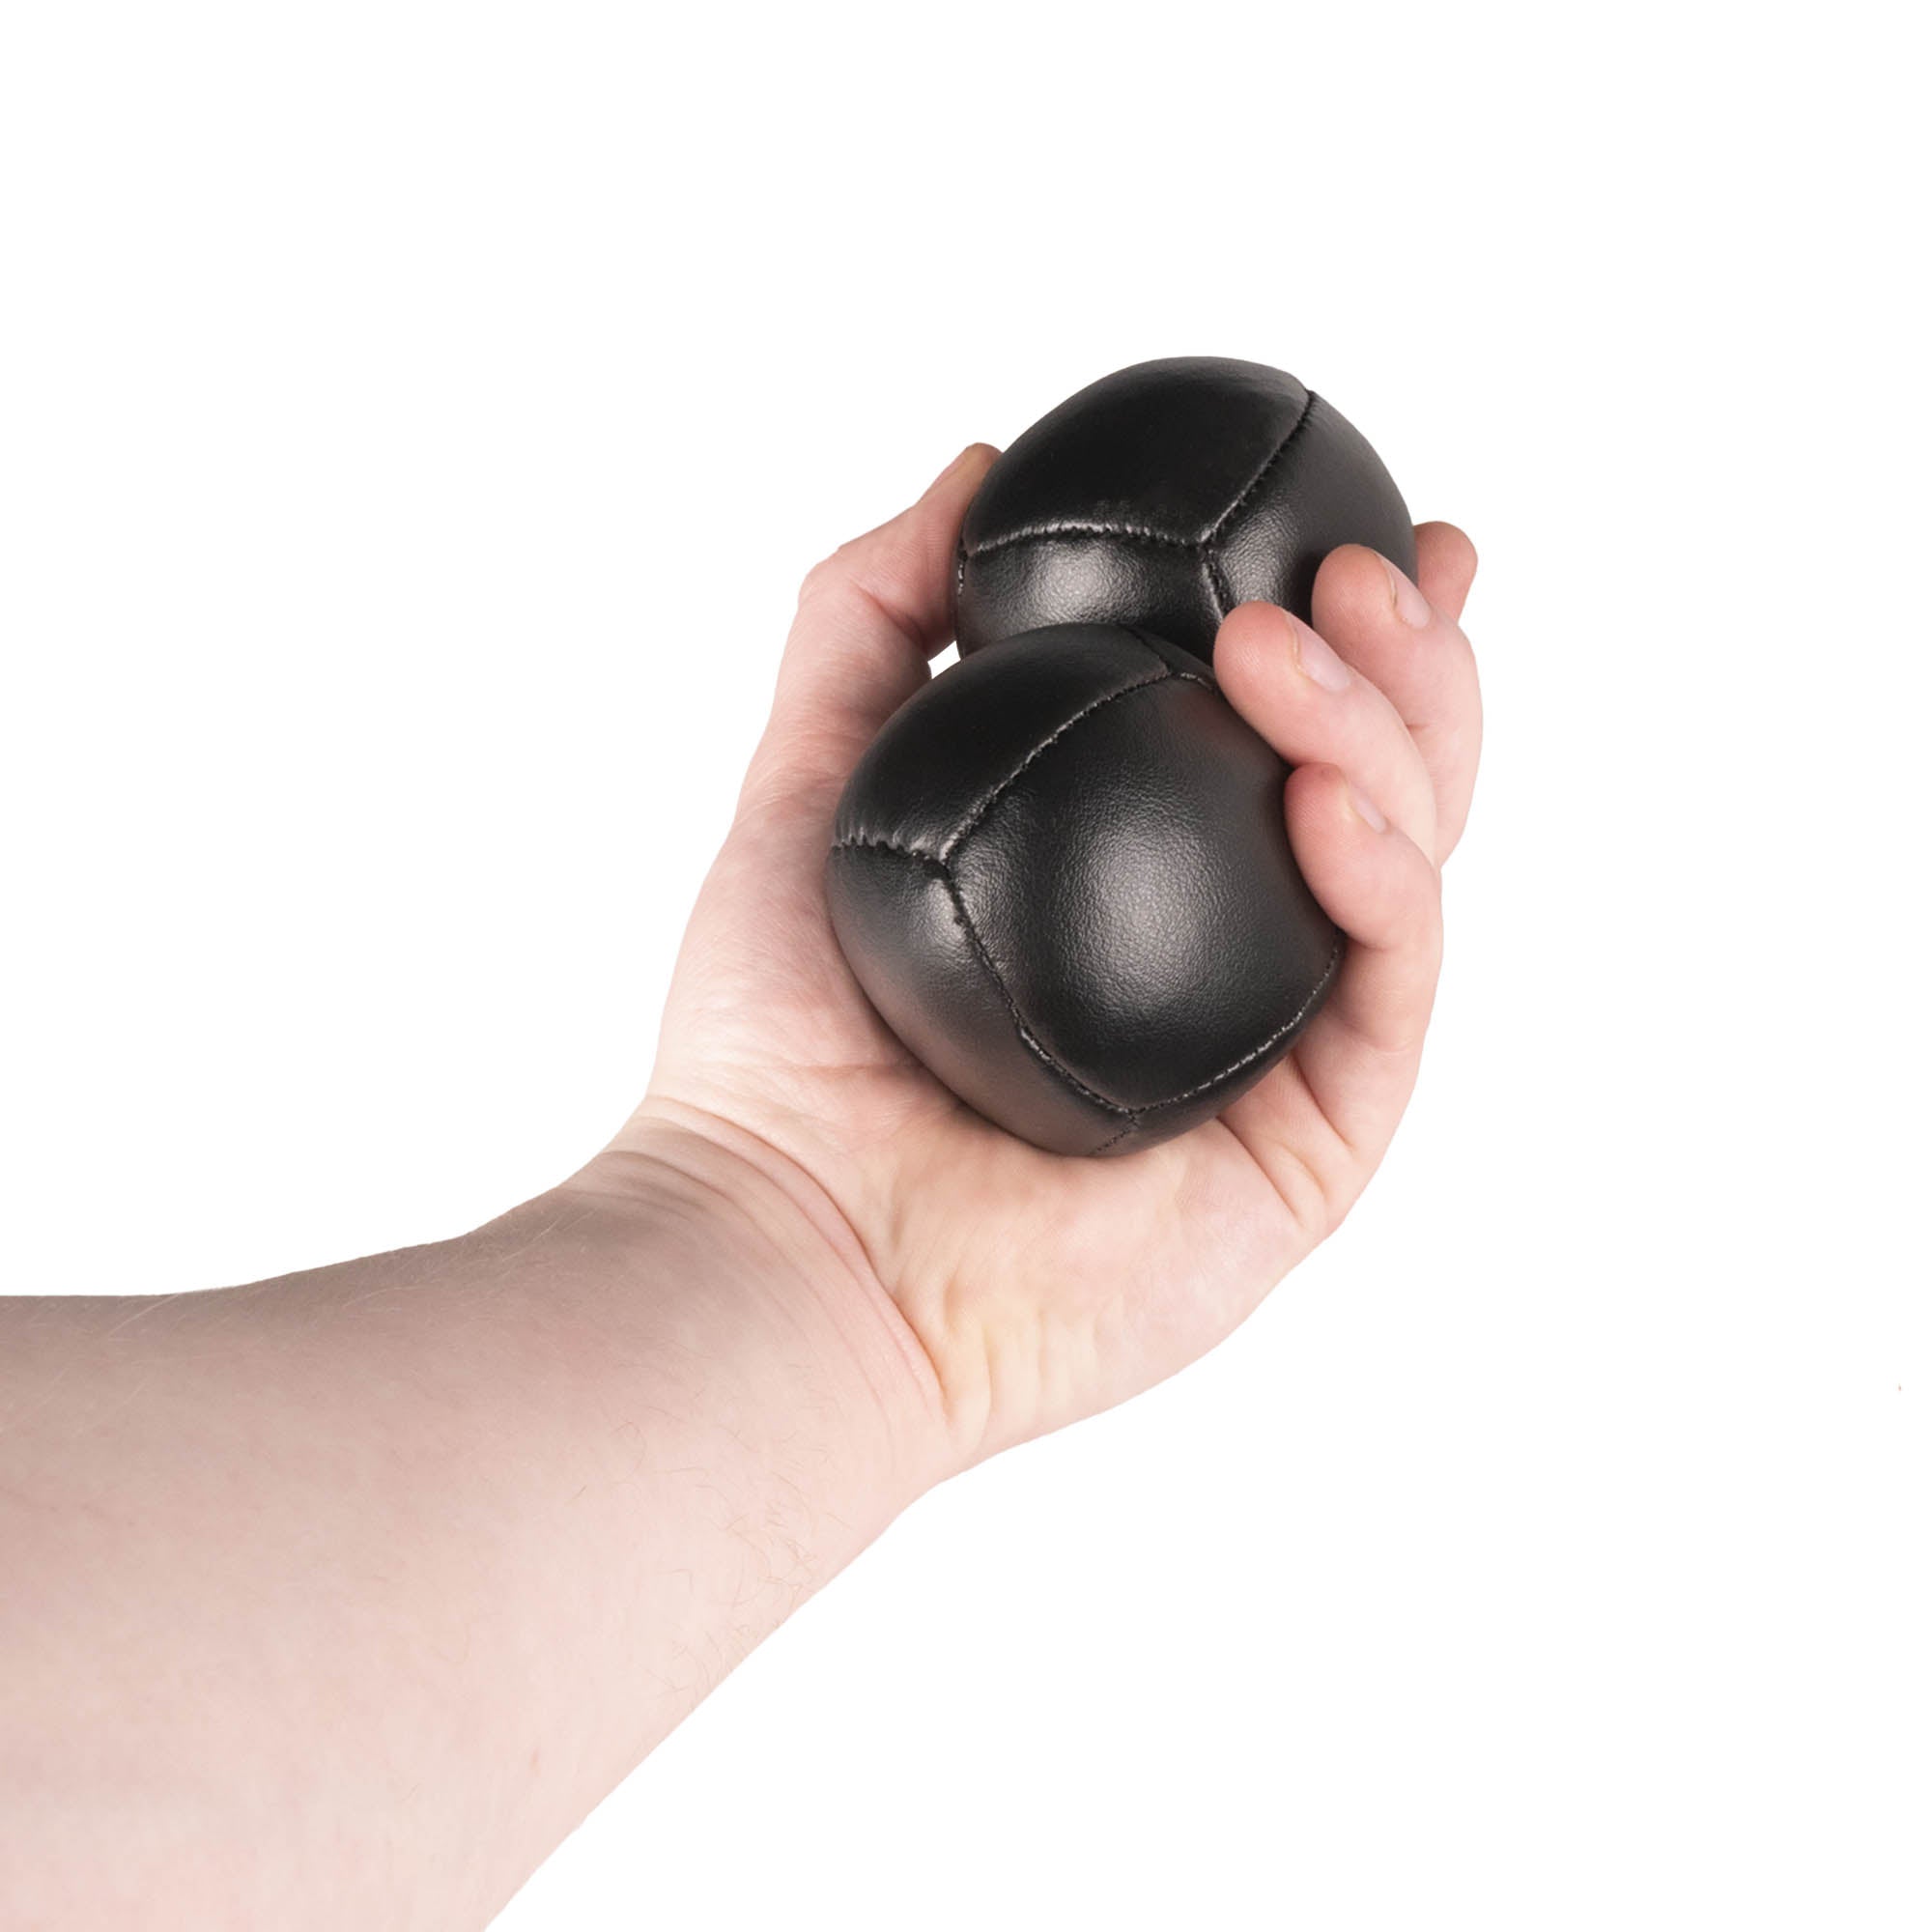 Firetoys two black 110g thud juggling balls in hand